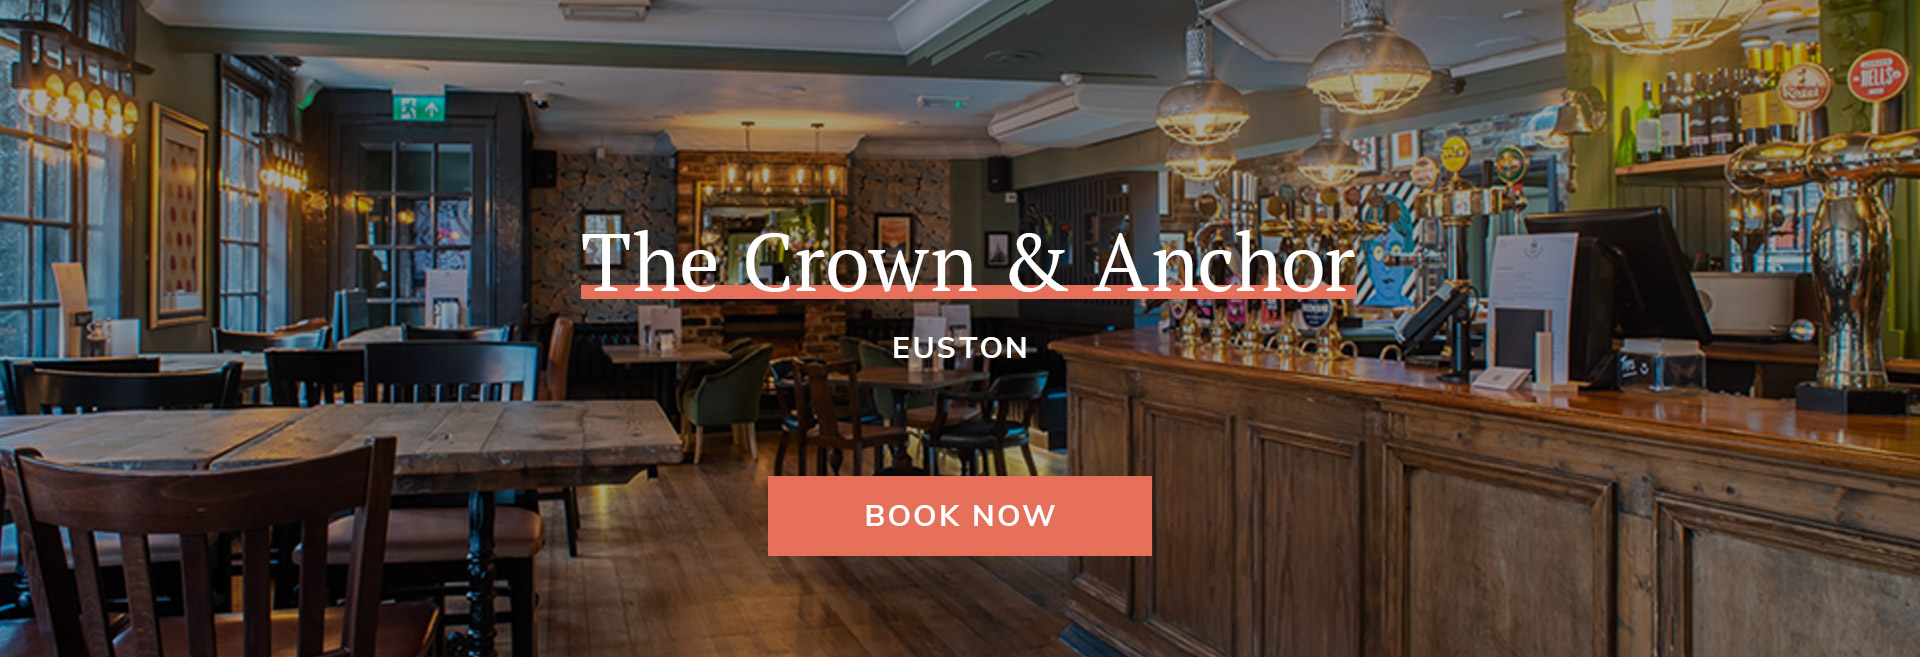 The Crown and Anchor Euston Banner 2